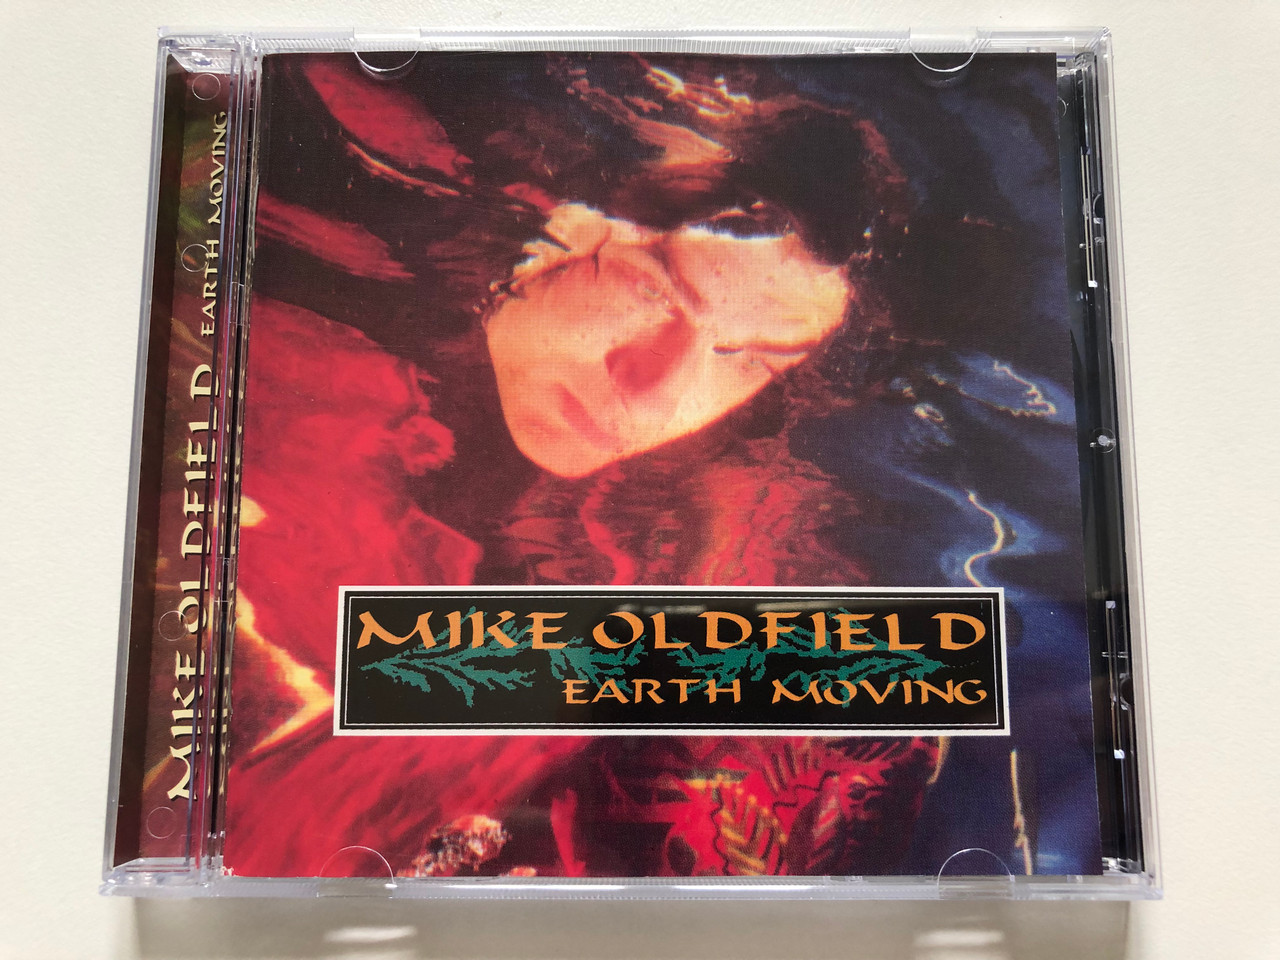 https://cdn10.bigcommerce.com/s-62bdpkt7pb/products/31035/images/182931/Mike_Oldfield_Earth_Moving_Disky_Audio_CD_1997_VI_882352_1__54031.1624958468.1280.1280.JPG?c=2